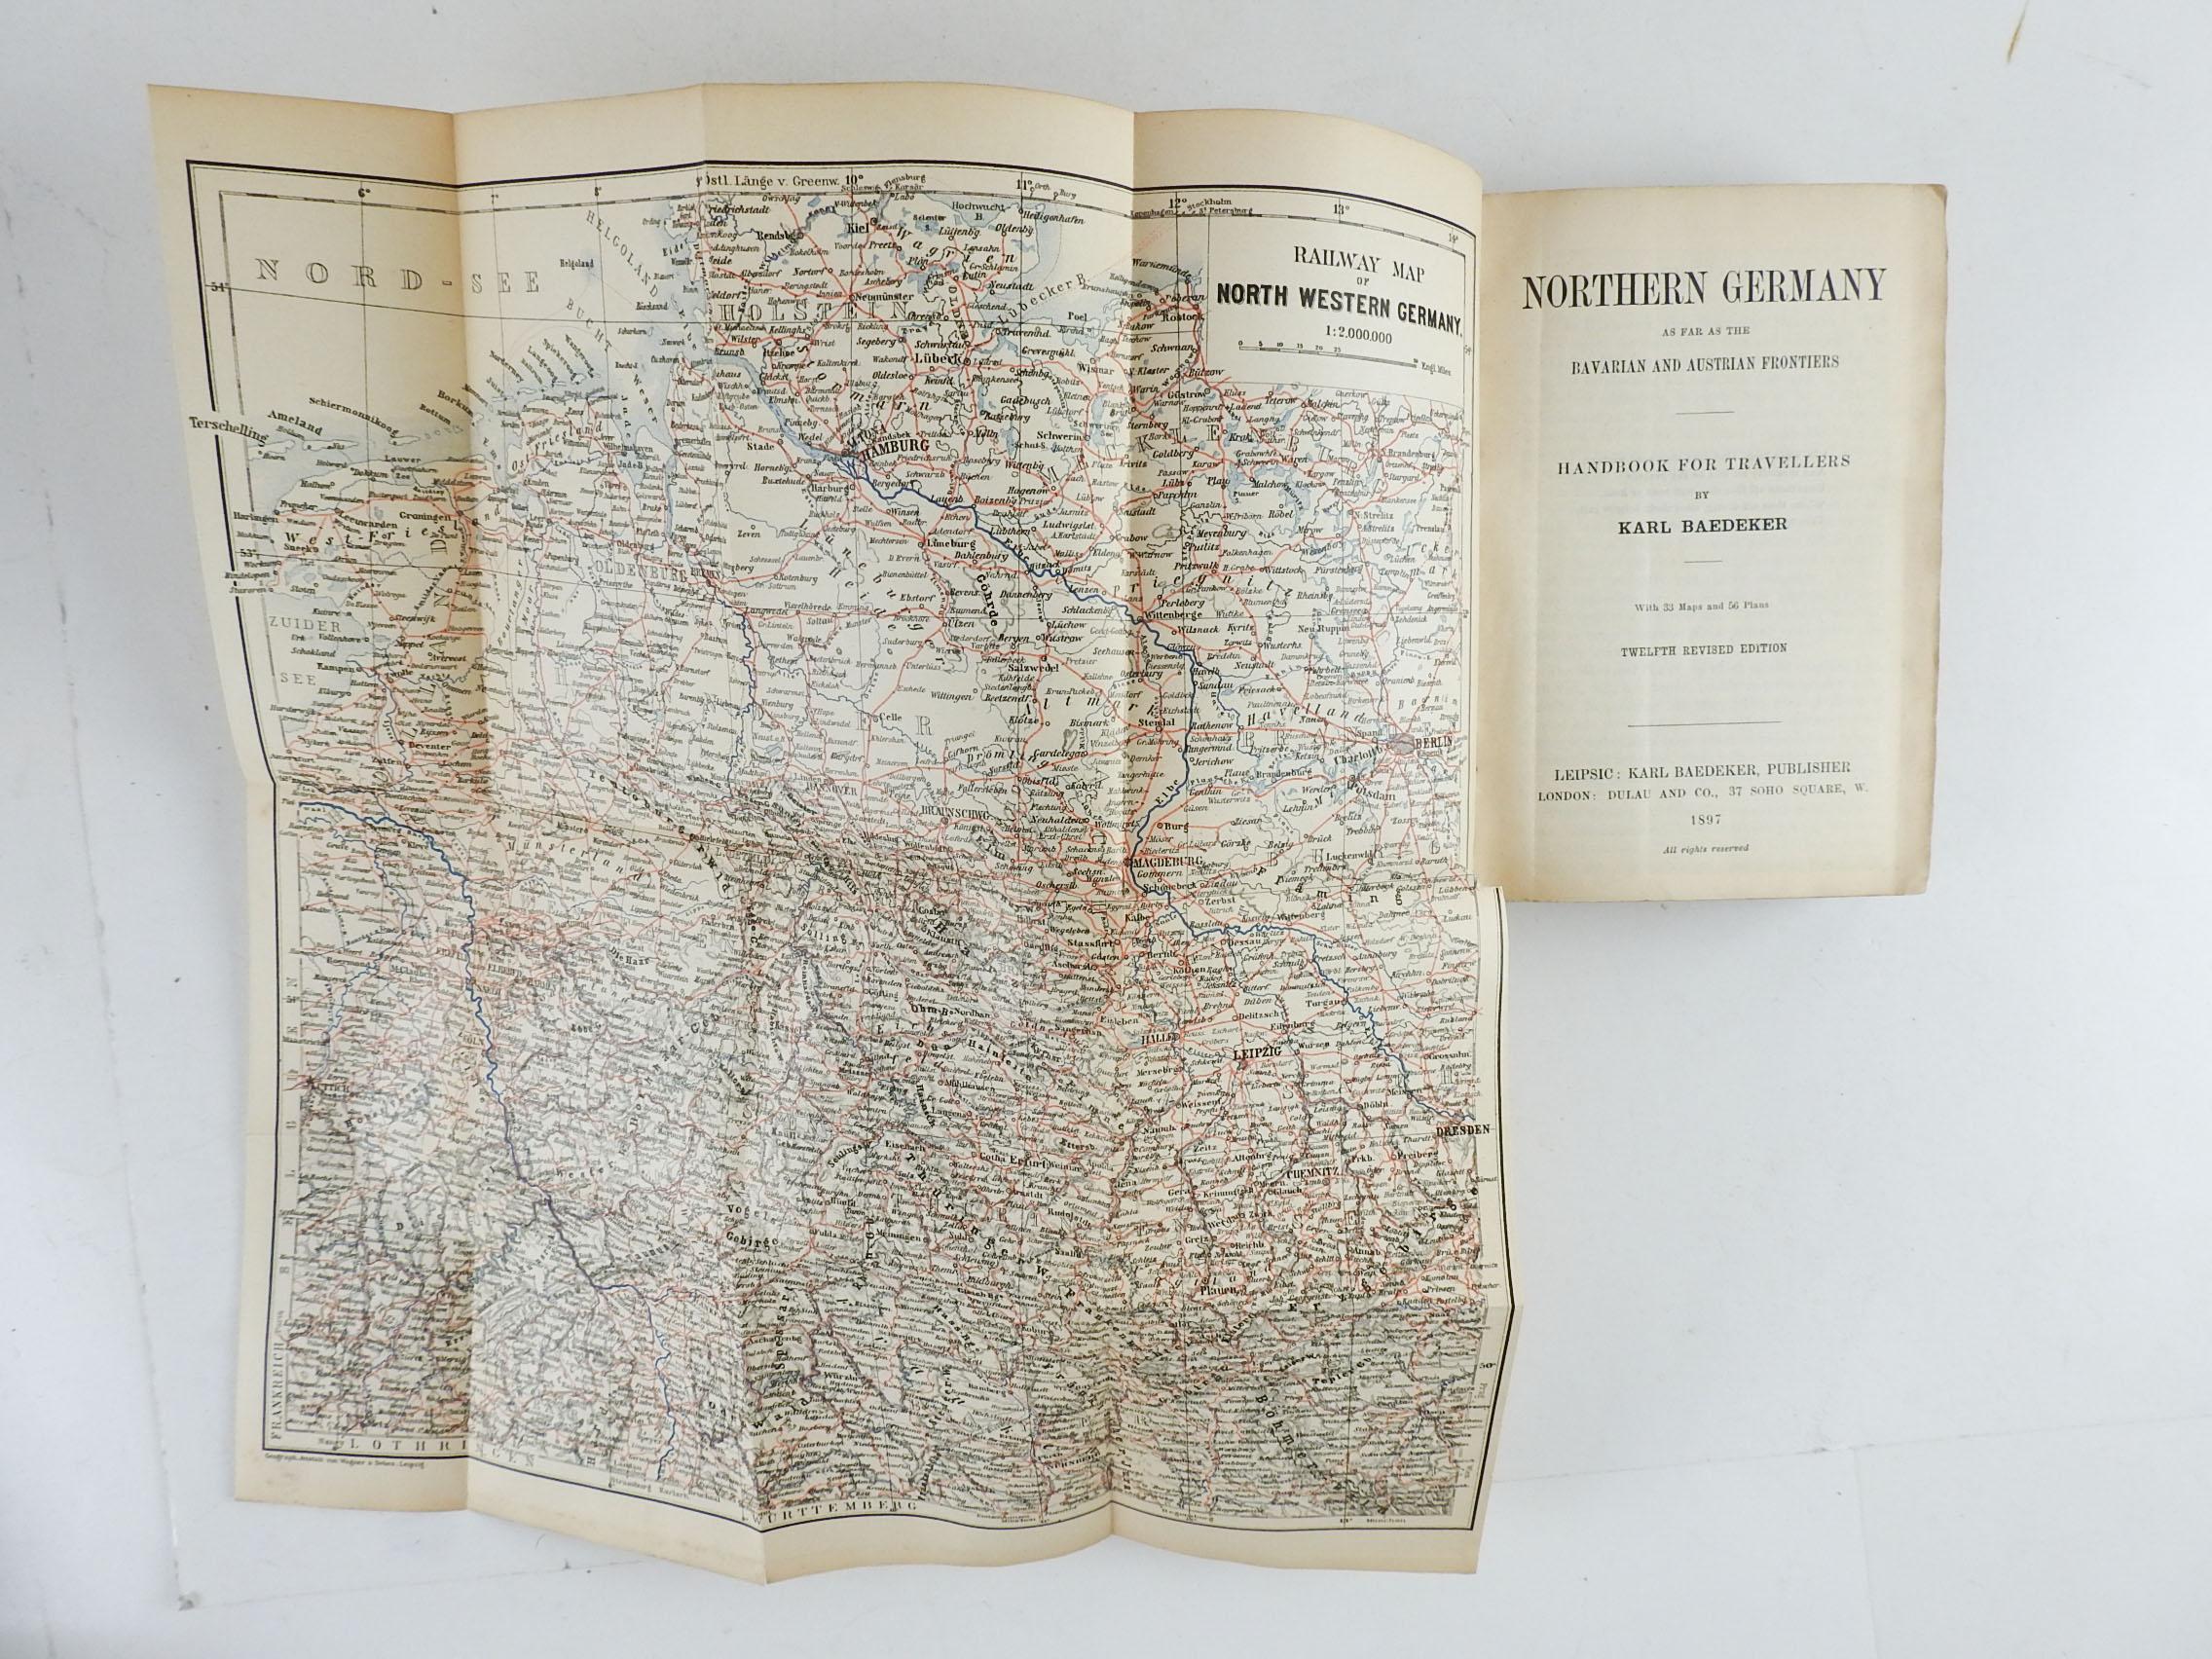 Baedeker's Northern, 1897 and Southern Germany, 1914. Handbook for travelers by Karl Baedeker.  Published by Baedeker, Leipzig, 1897/1914. Since the 1830's Baedeker set the standard for authoritative pocket guidebooks for tourists.  Detailed